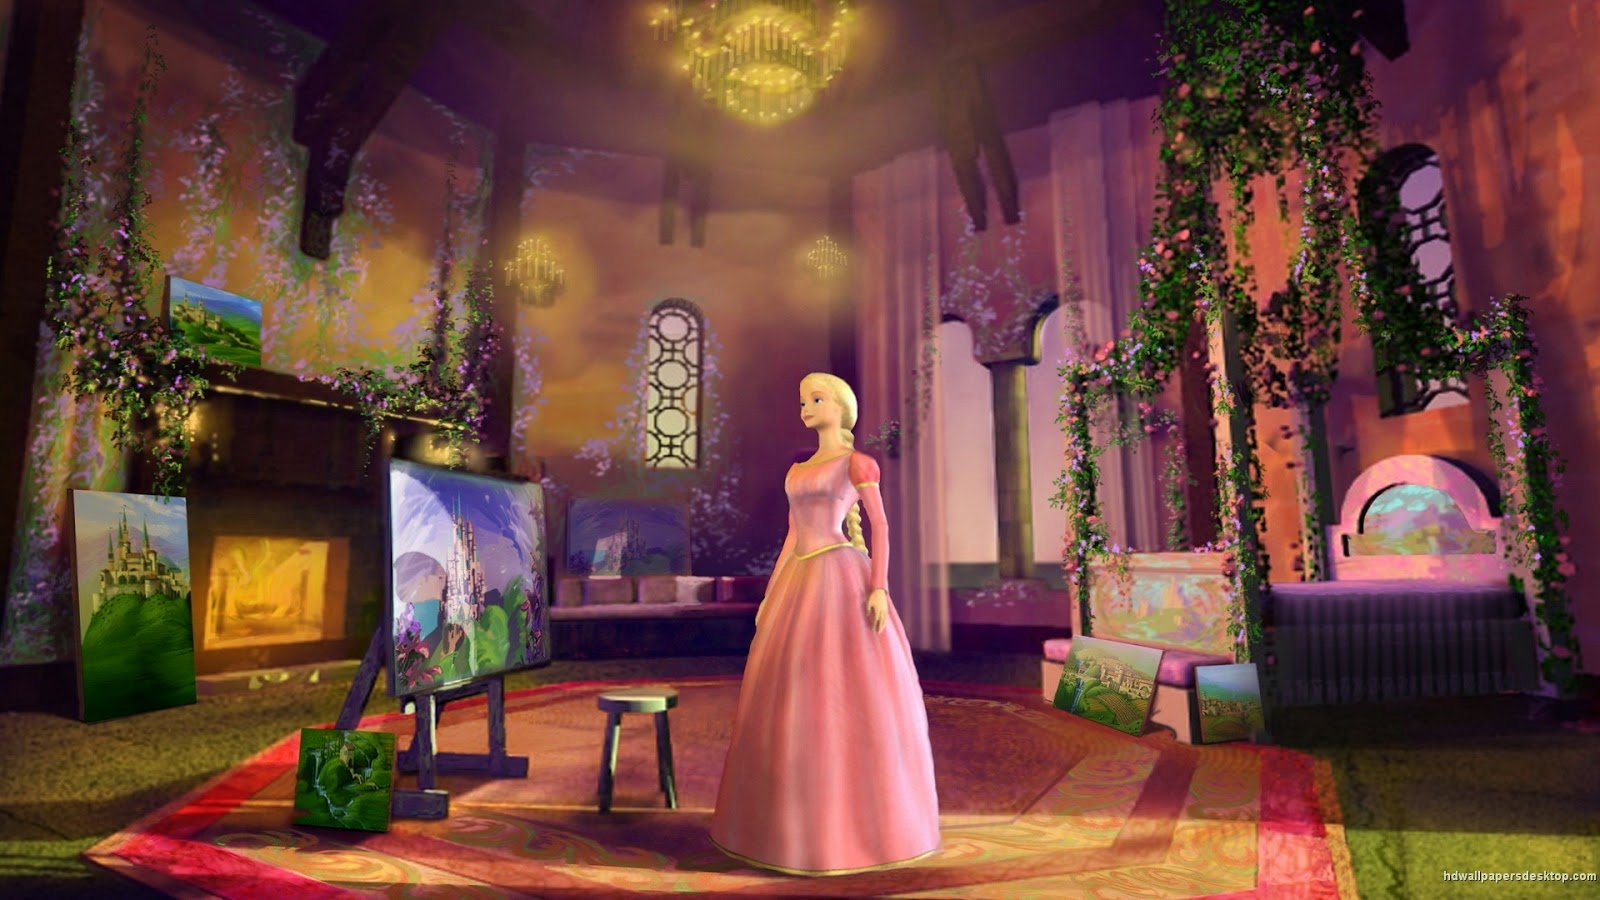 Rapunzel Is A German Fairy Tale In The Collection